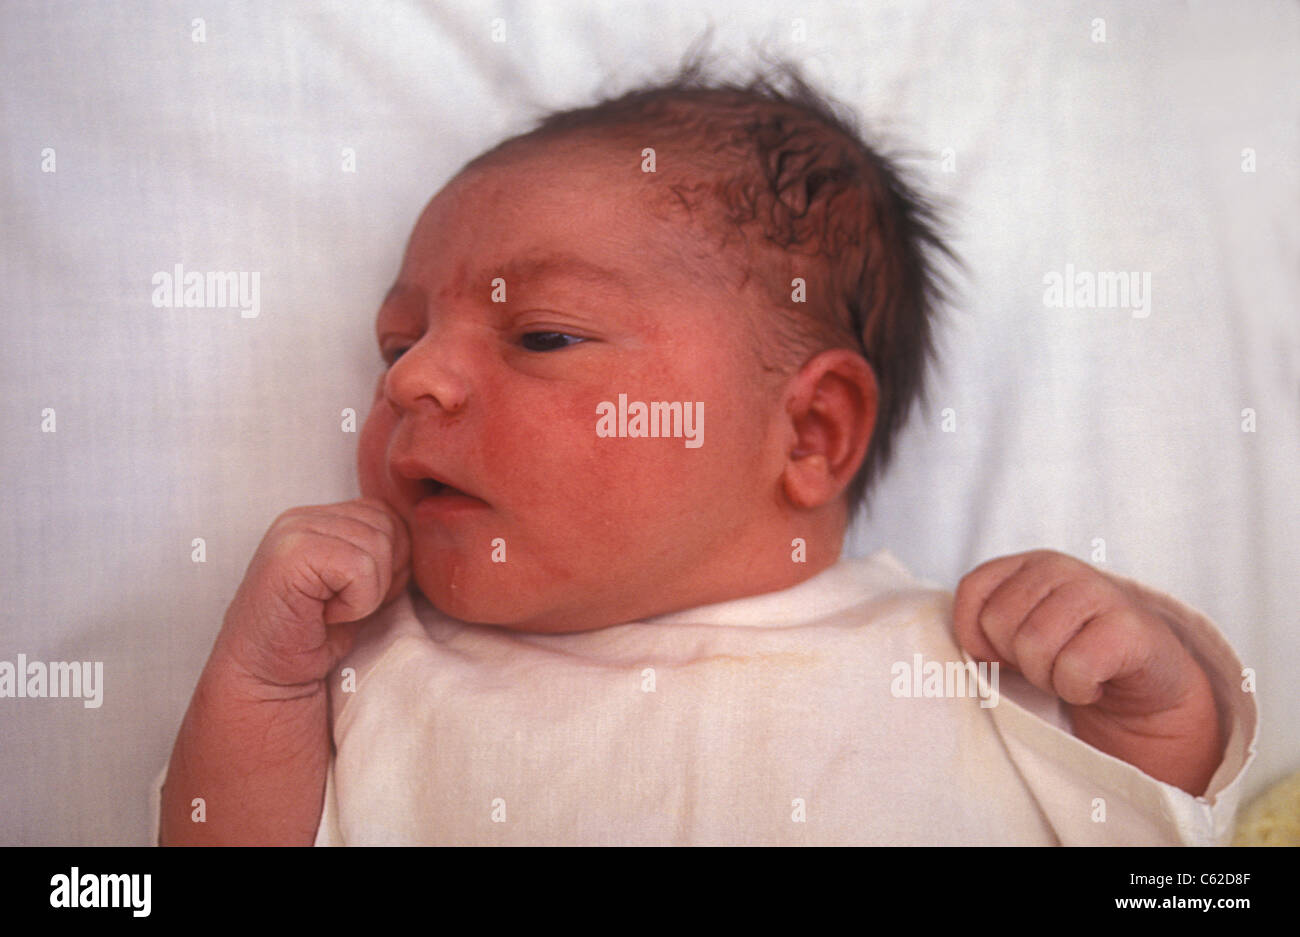 newborn baby with elongated head due to long labour Stock Photo